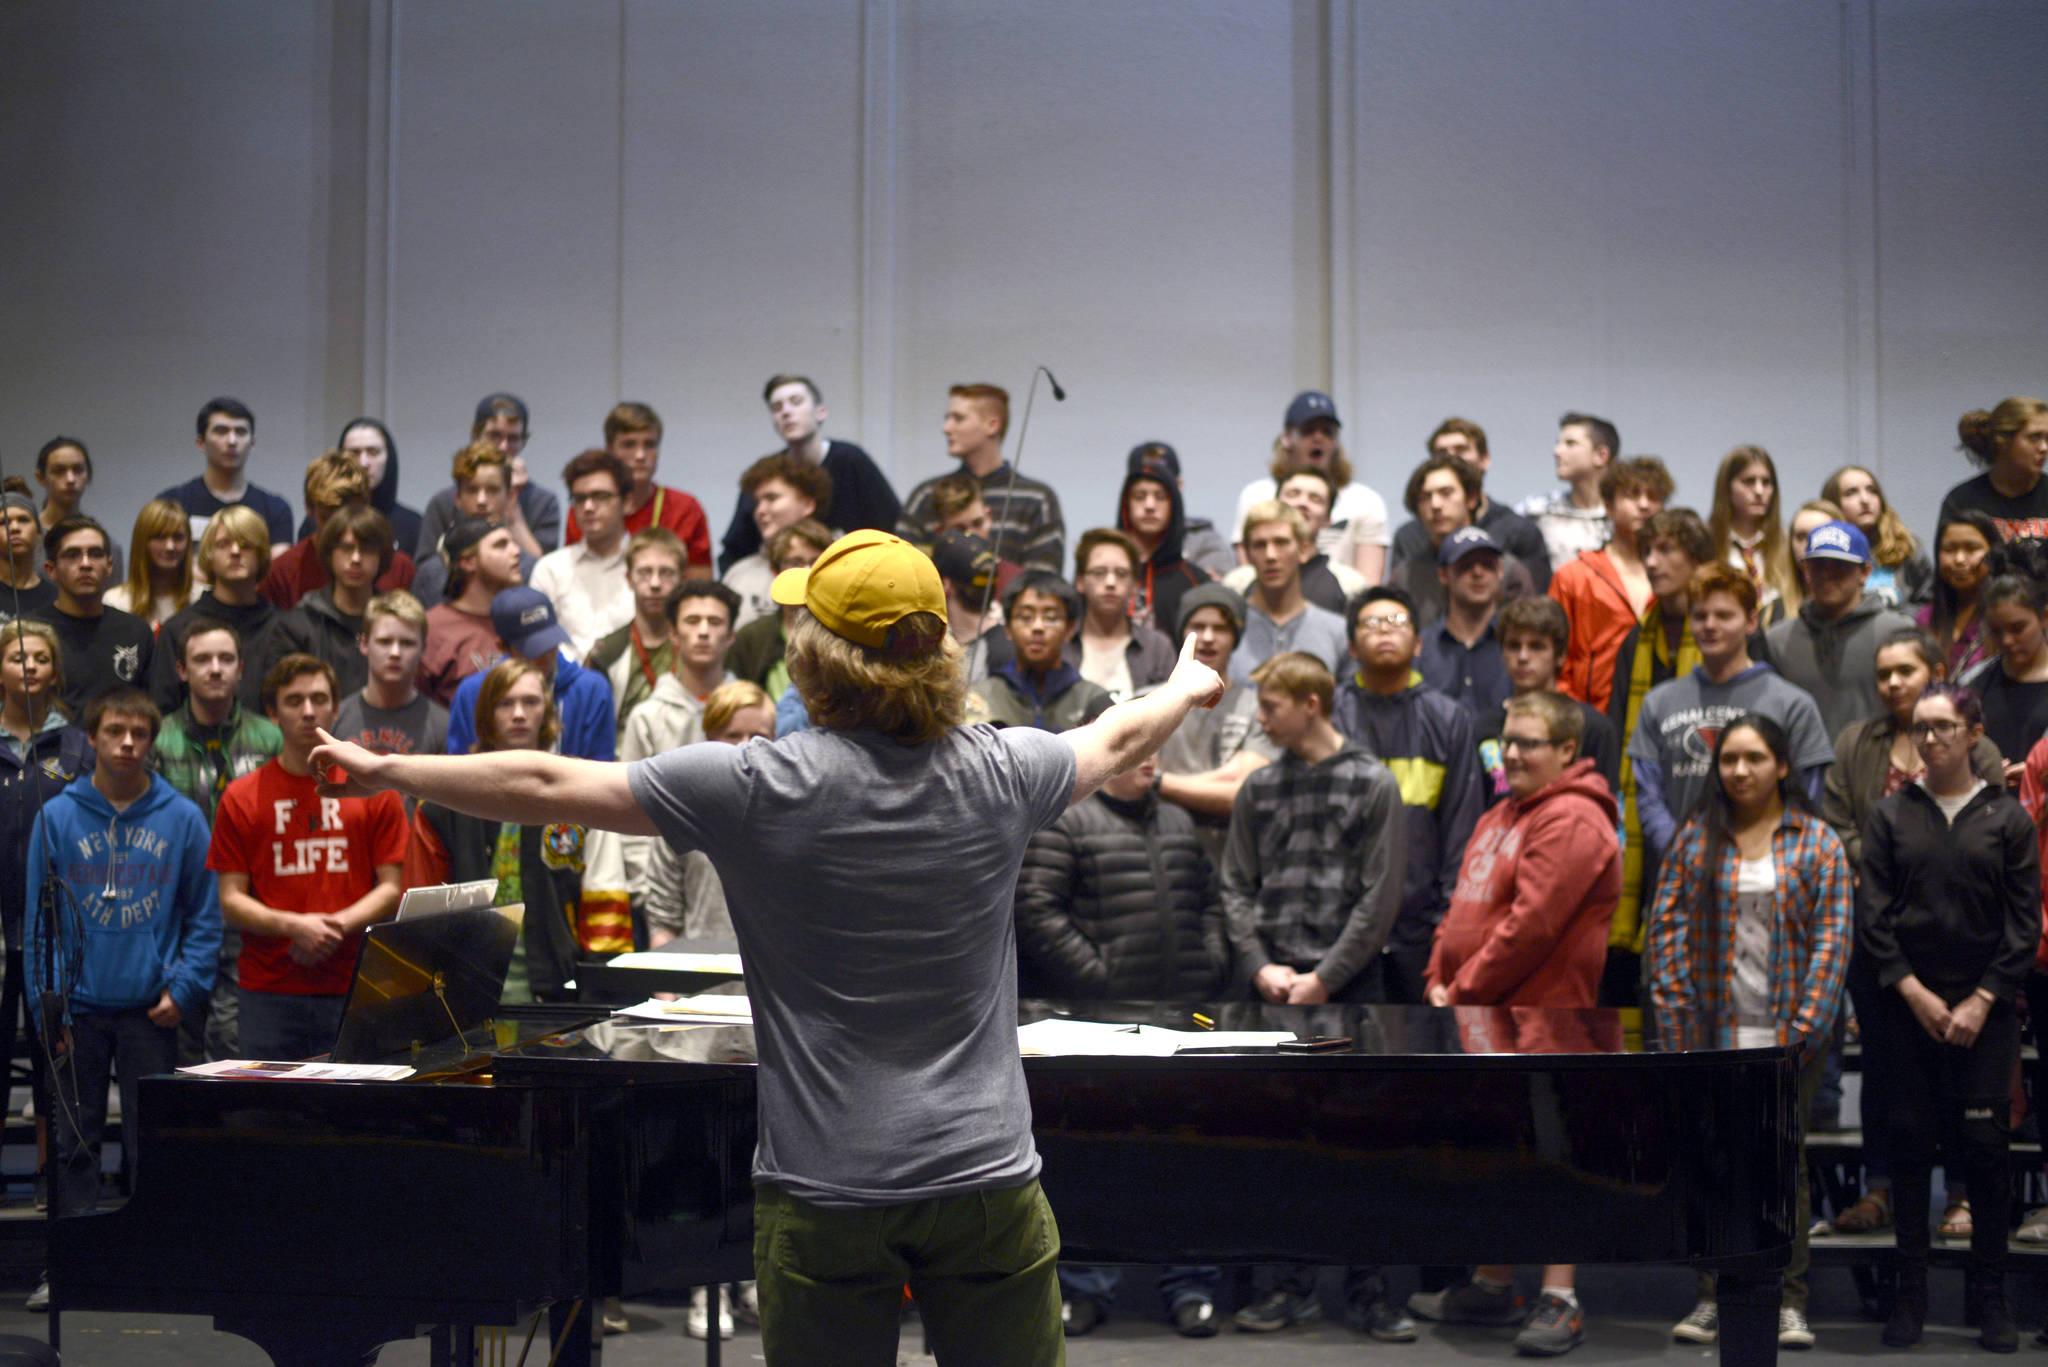 Simon Nissen organizes students in his choir class, grouping singers of similar vocals in the same section on December 15, 2017 at Kenai Central High School in Kenai, Alaska. (Photo by Kat Sorensen/Peninsula Clarion)                                Simon Nissen organizes students in his choir class, grouping singers of similar vocals in the same section on December 15, 2017 at Kenai Central High School in Kenai, Alaska. (Photo by Kat Sorensen/Peninsula Clarion)                                 Simon Nissen organizes students in his choir class, grouping singers of similar vocals in the same section on Dec. 15, 2017 at Kenai Central High School in Kenai, Alaska. (Photo by Kat Sorensen/Peninsula Clarion)